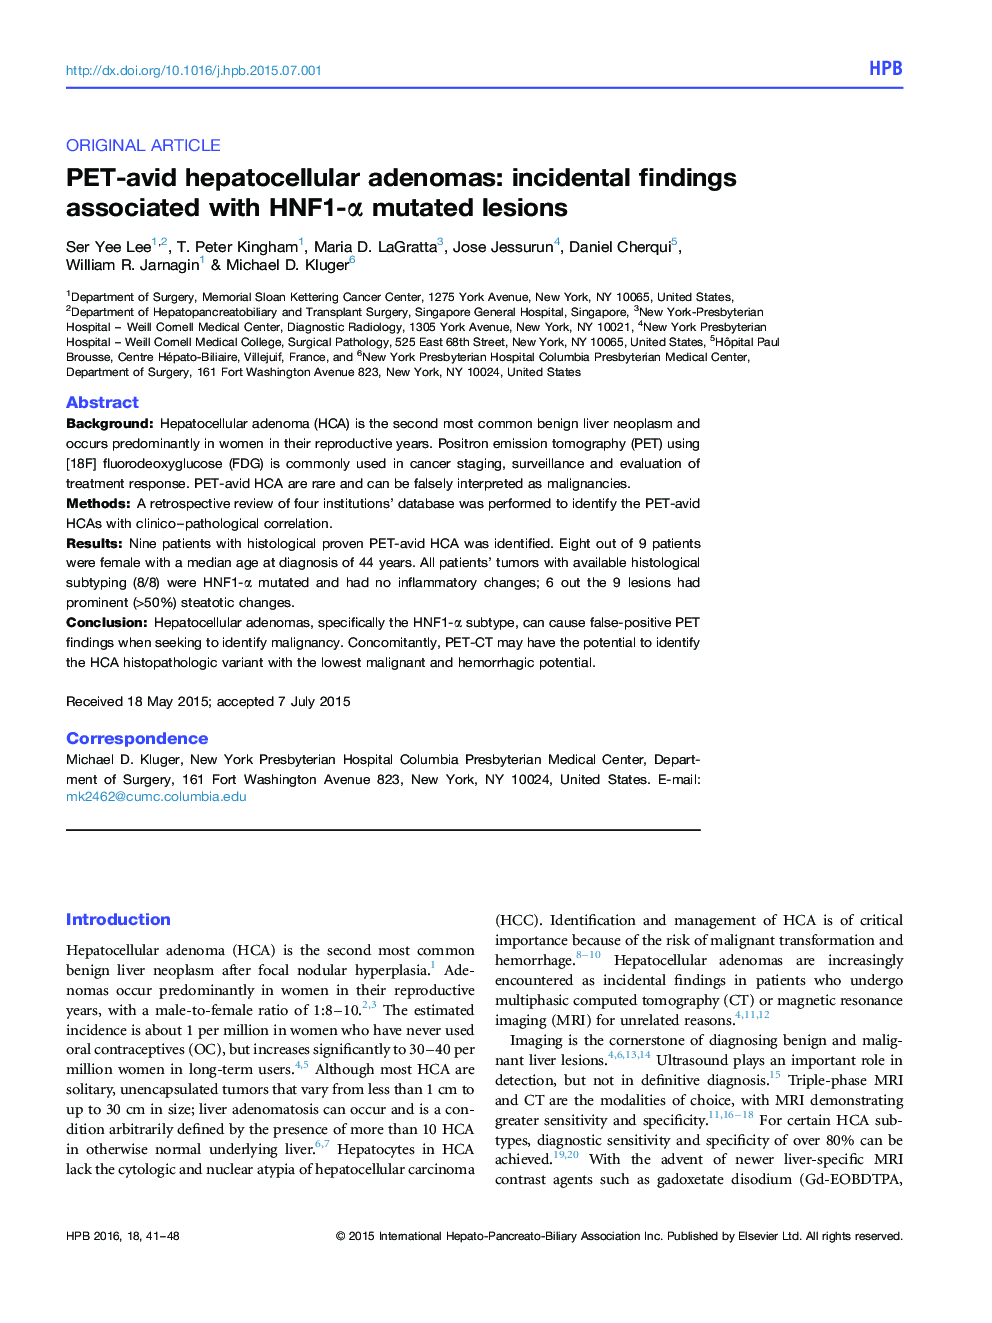 PET-avid hepatocellular adenomas: incidental findings associated with HNF1-Î± mutated lesions